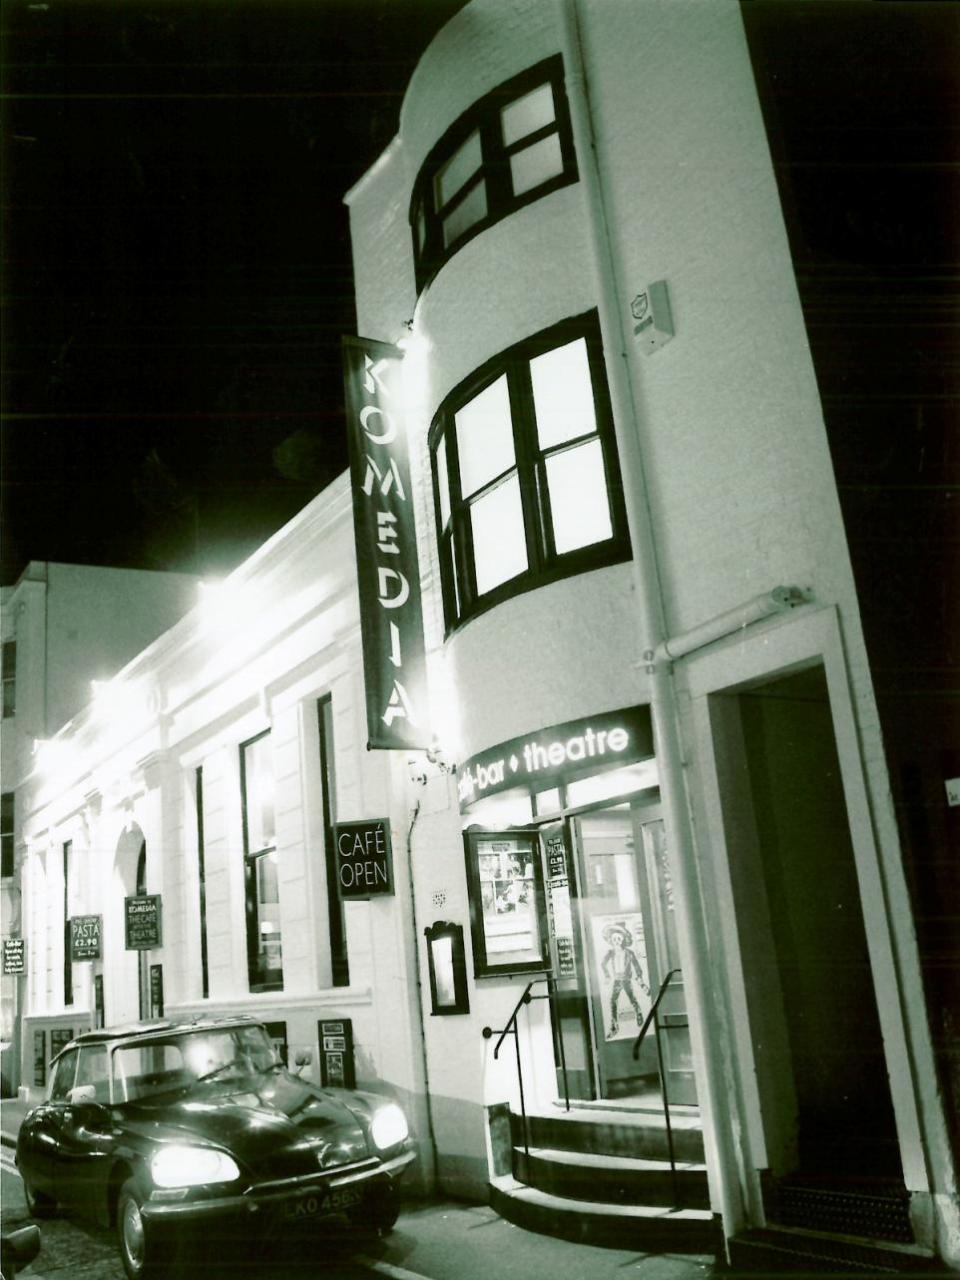 The Argus: Komedia when it was in Manchester Street, Kemp Town, back in 1994